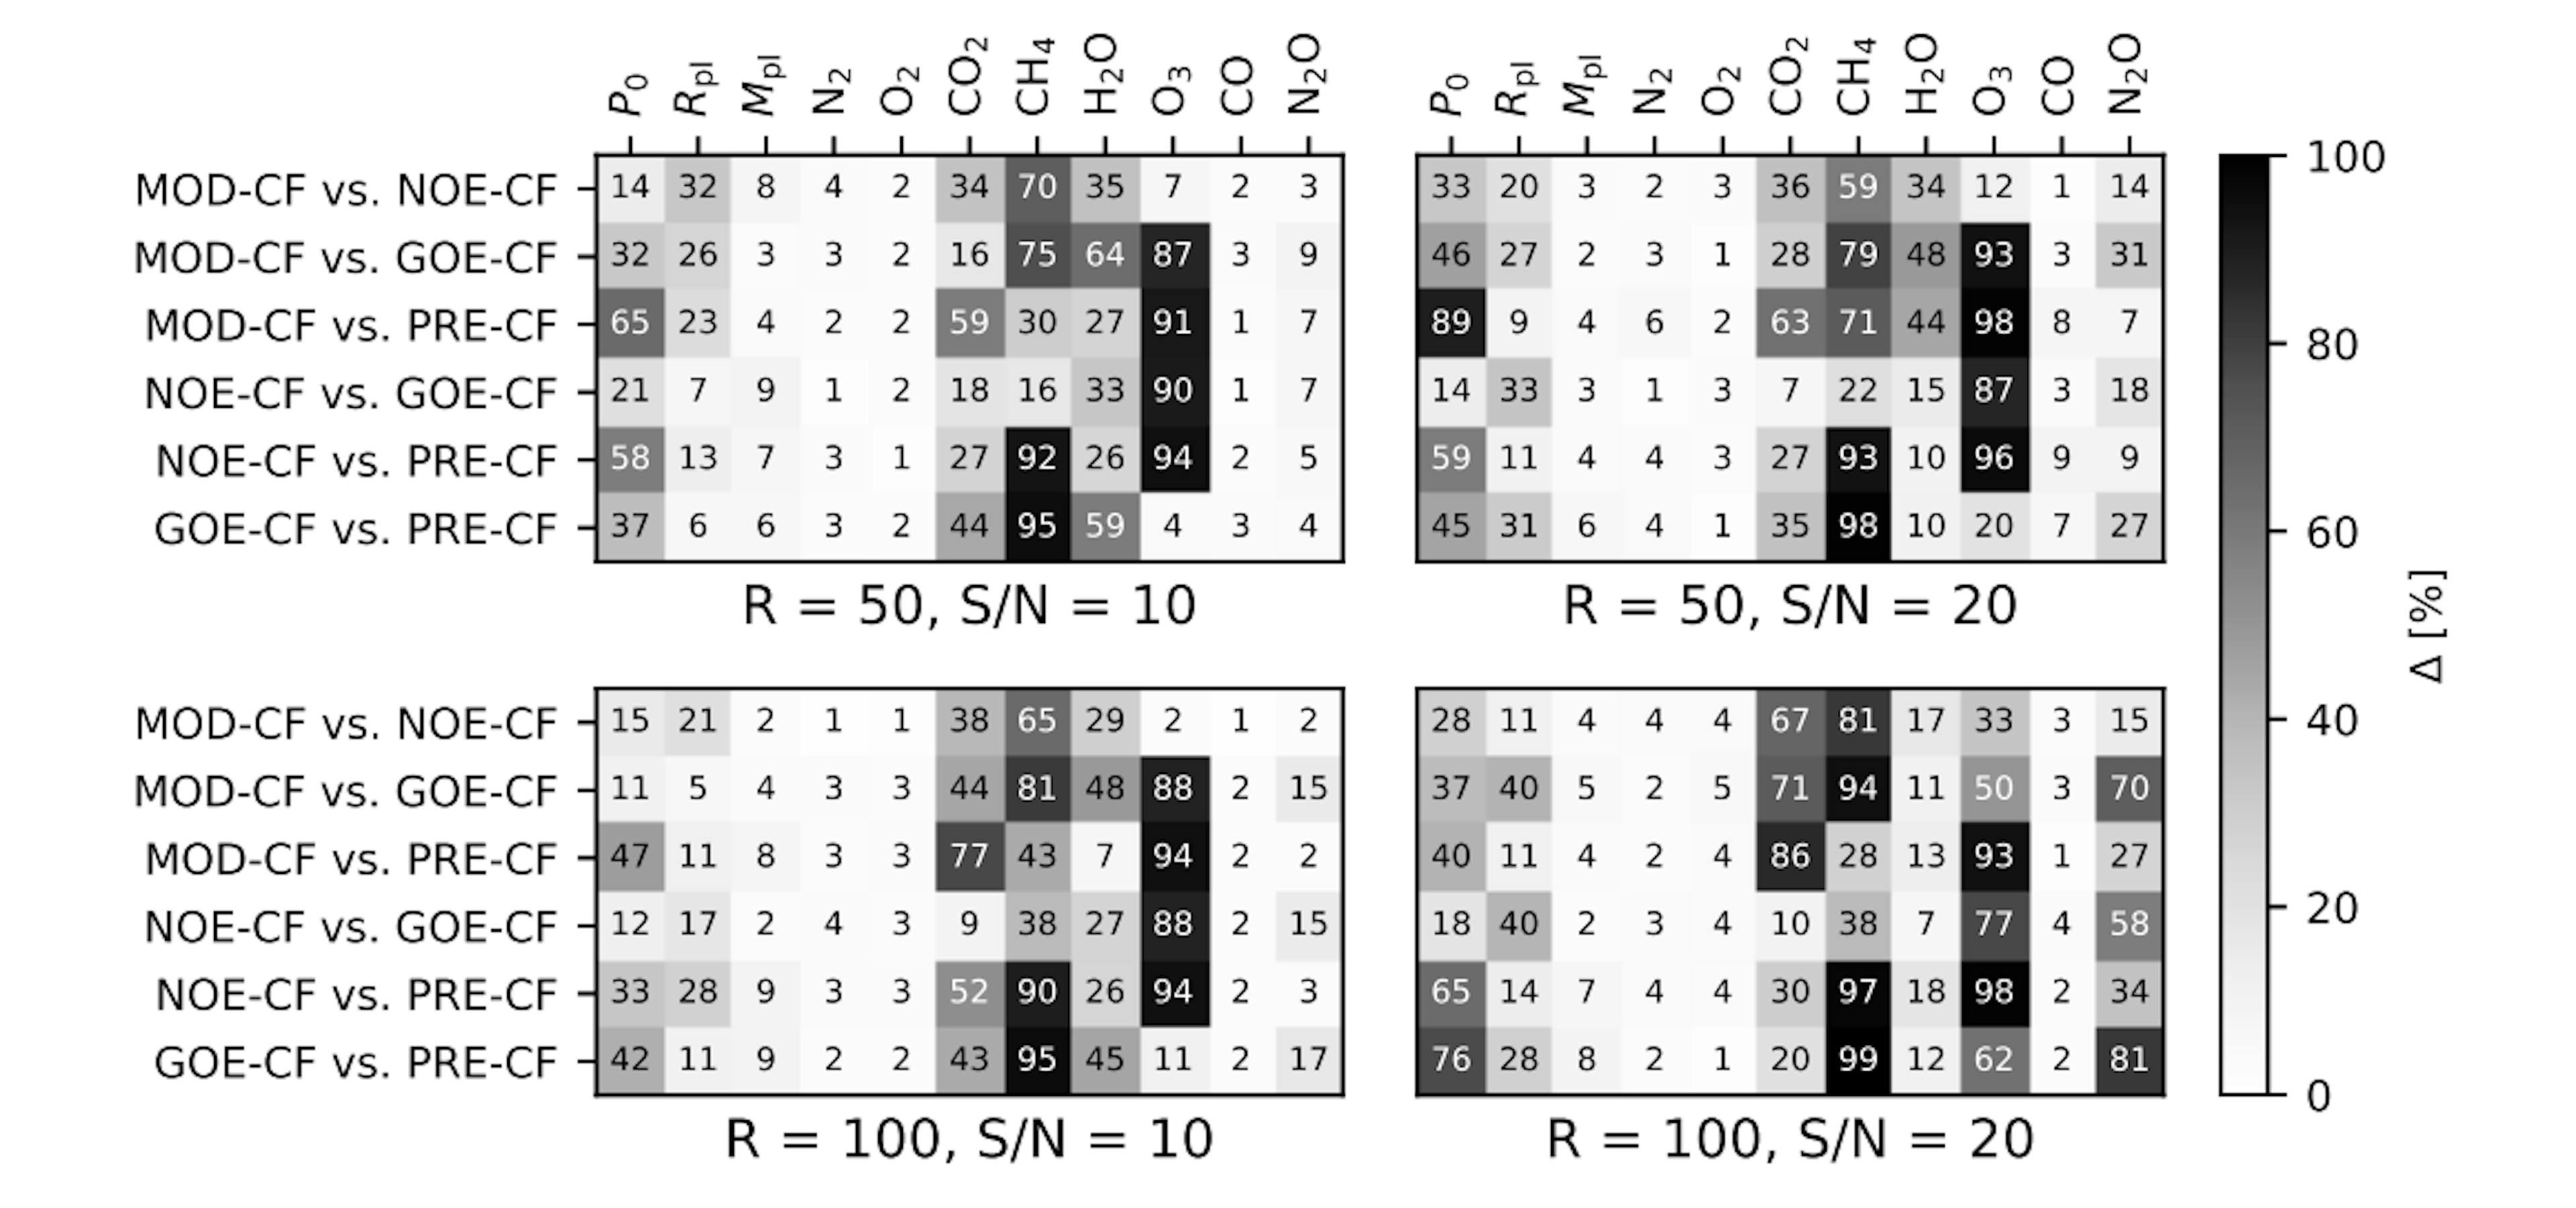 Fig. 11: Maximum difference ∆ between the cumulative posteriors for the different model parameters, for each combination of input spectra (cloud-free subset), and different R-S/N pairs. The background of each cell in the tables is related to the value of ∆ (darker hues for larger ∆).